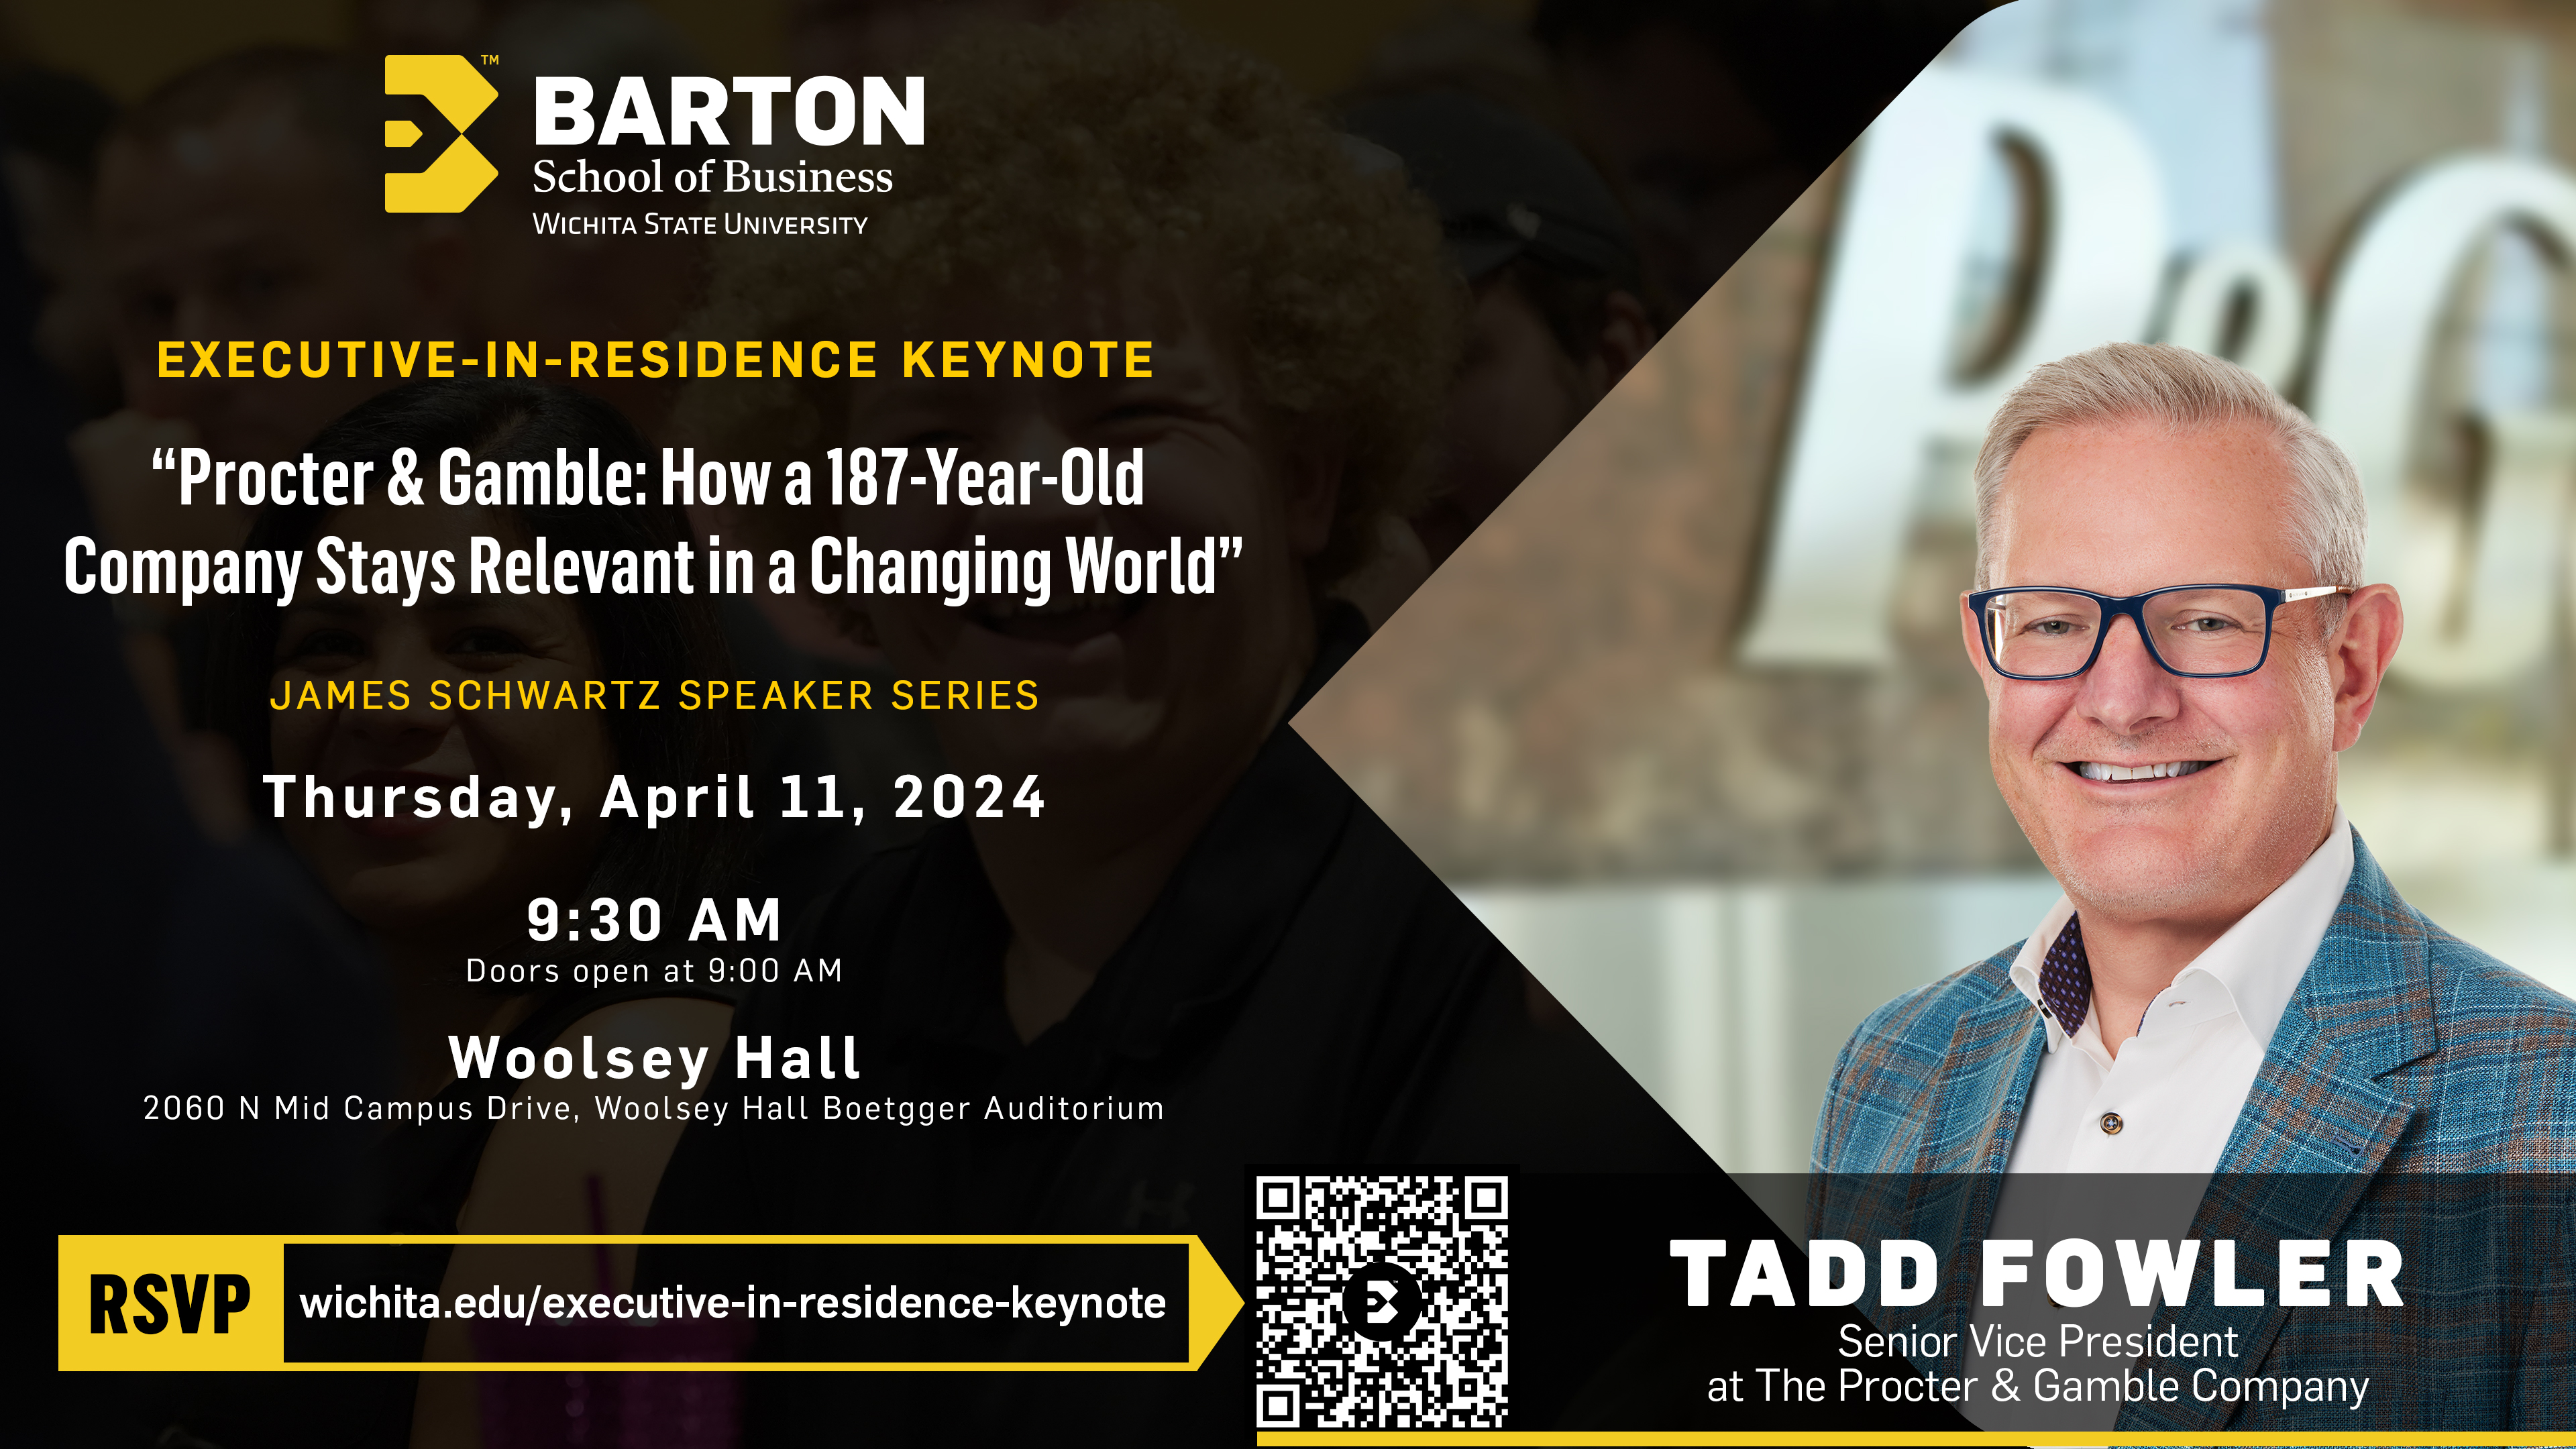 Tadd Fowler, Senior Vice President, Treasurer and Global Taxes at The Procter & Gamble Company and Spring 2024 Executive in Residence of the Barton School of Business.